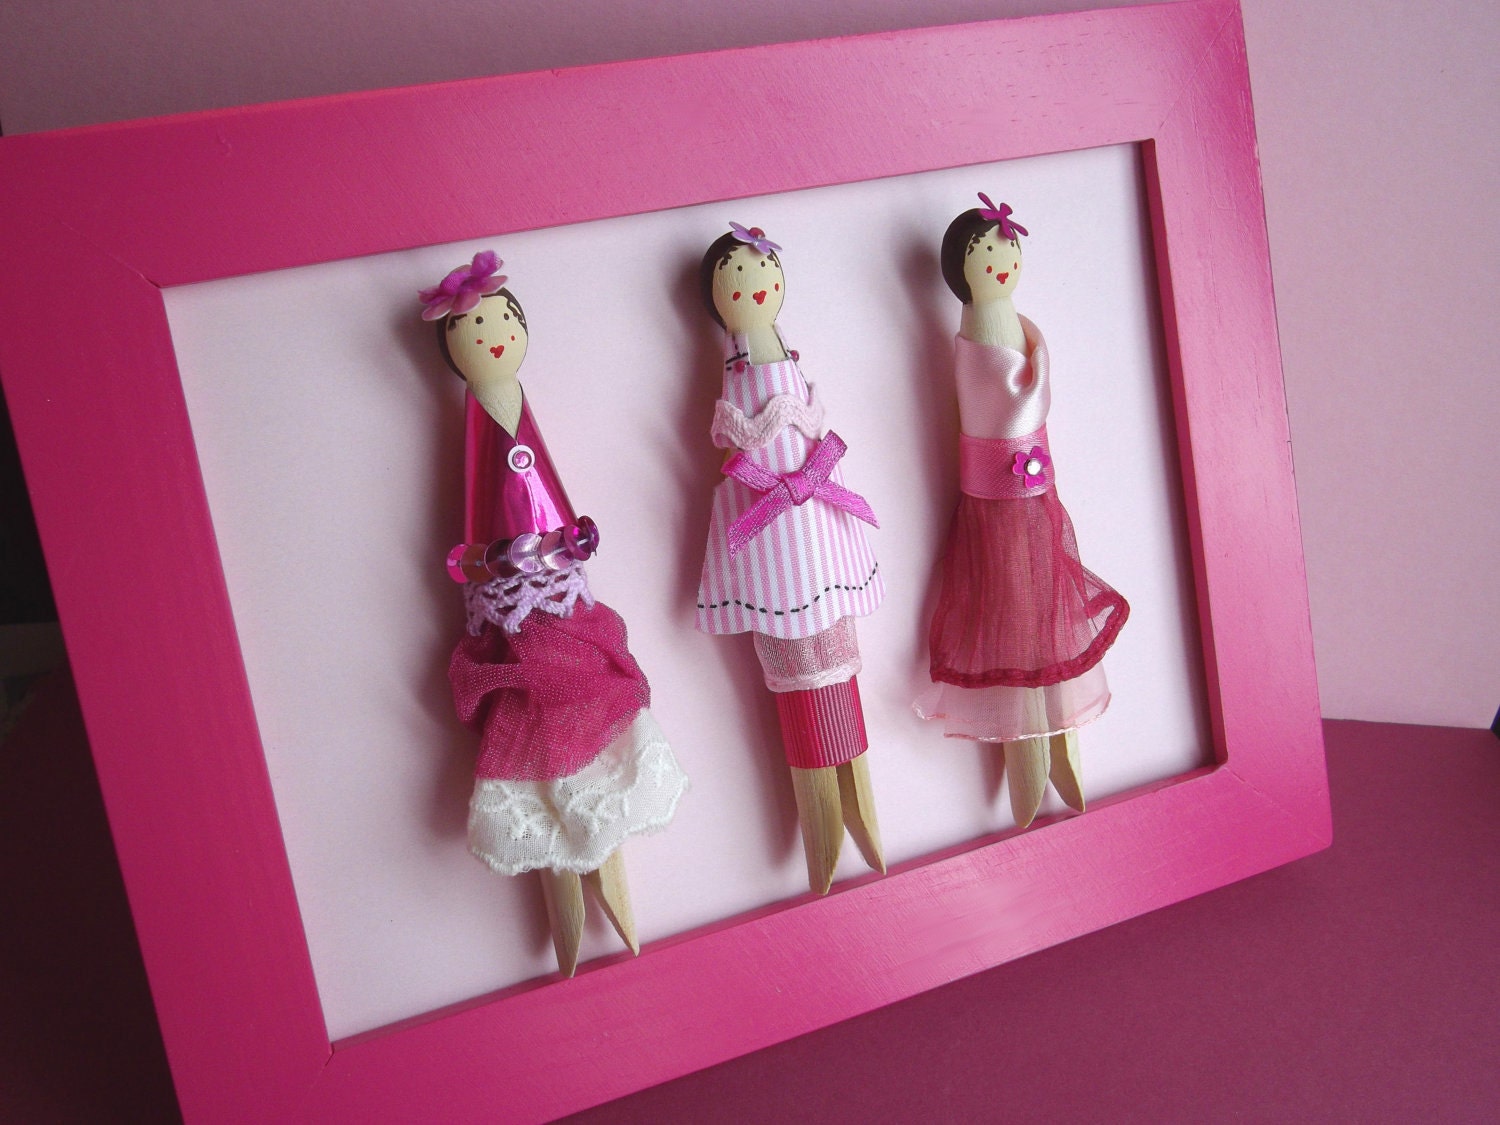 Wood Frame with 3 Little Wooden Characters, Pink Home decor, New baby girl